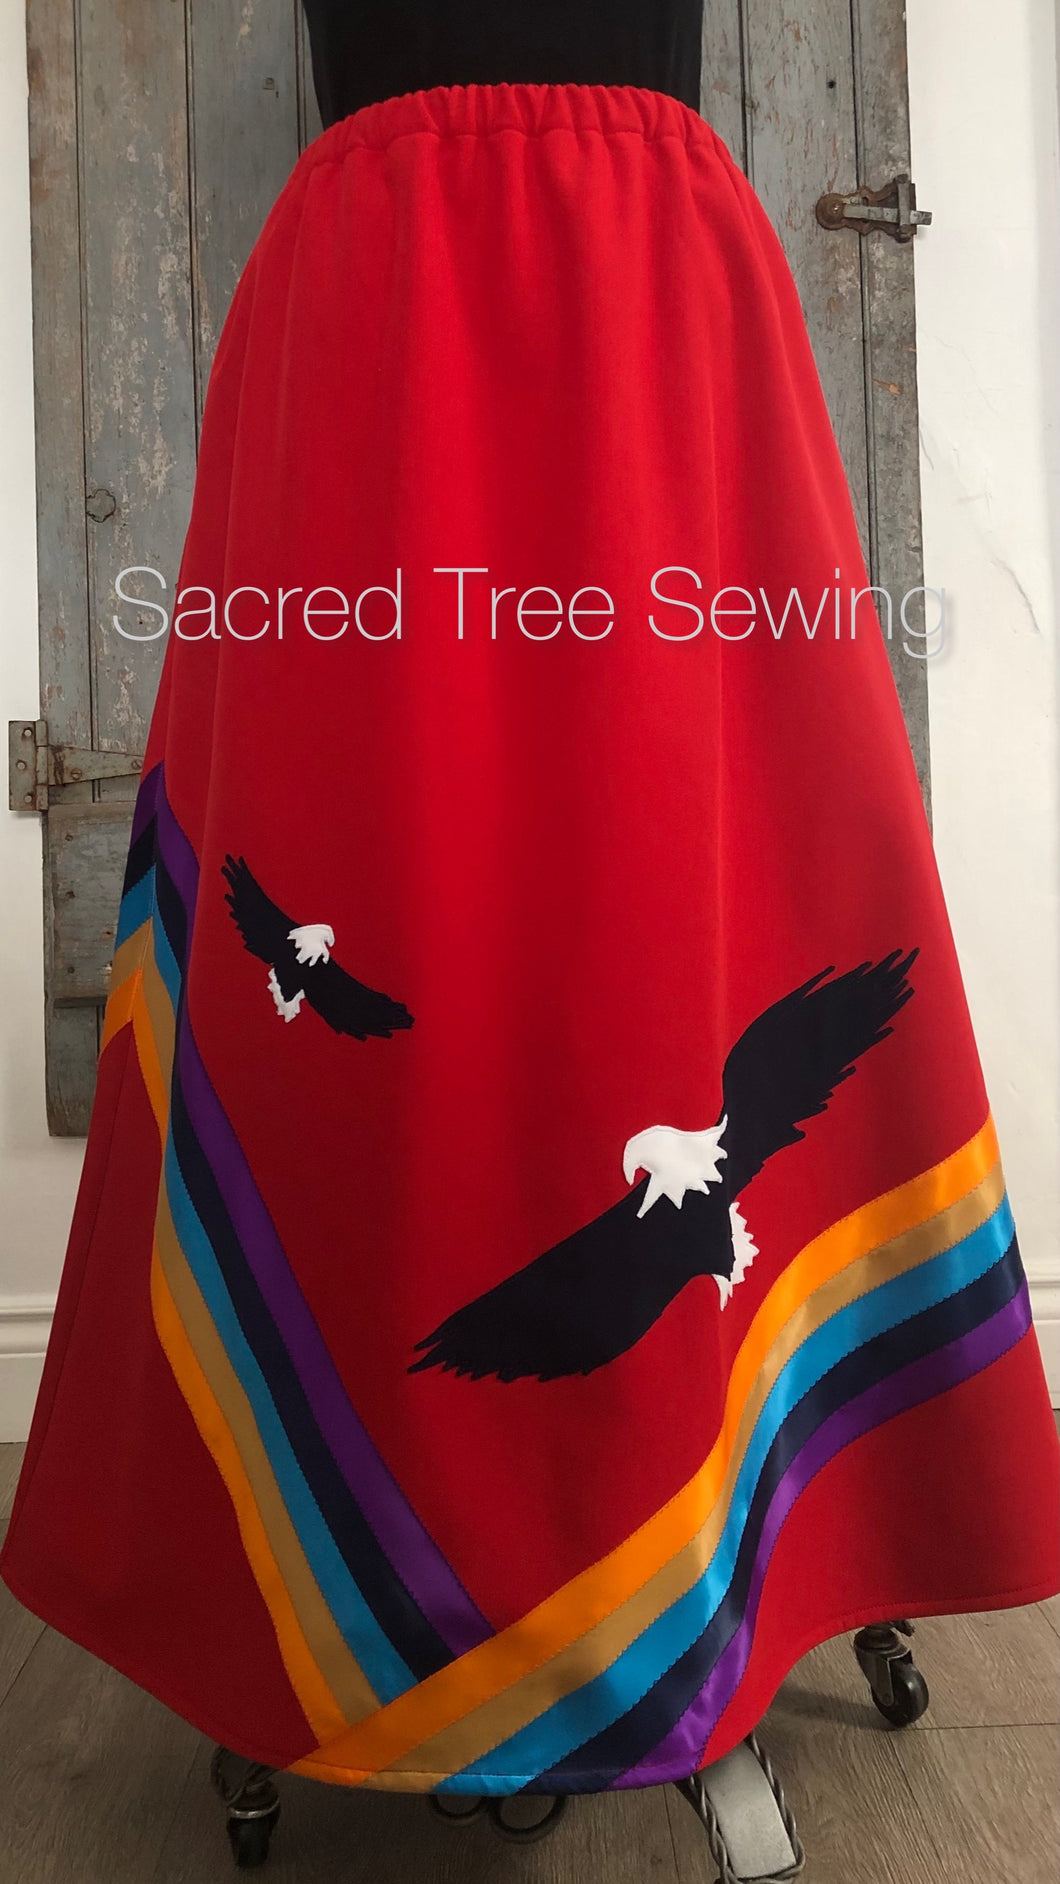 Two Eagles Ribbon Rain skirt front view with rainbow ribbons